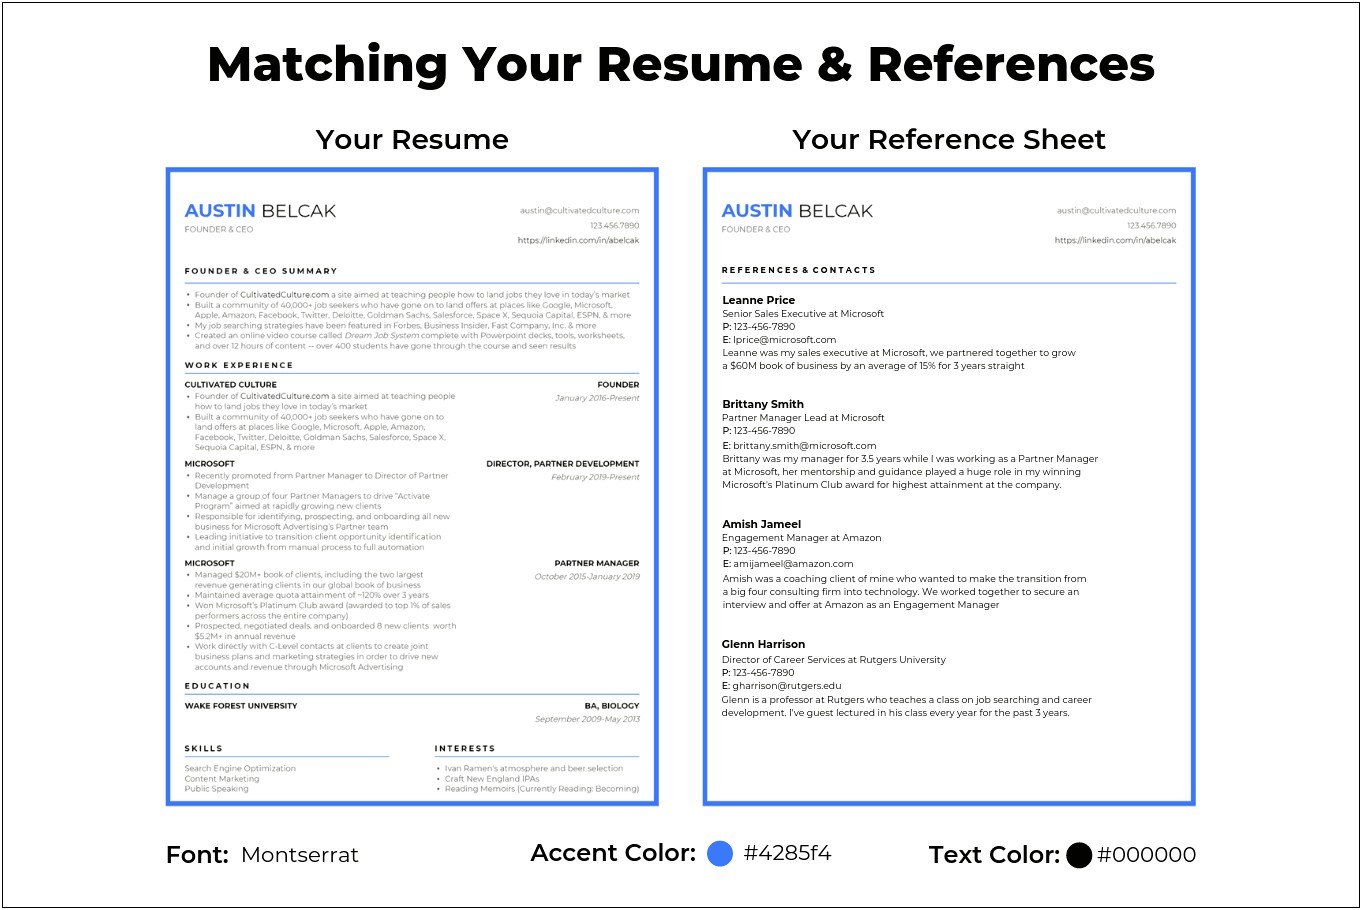 Do You Put Personal References On A Resume